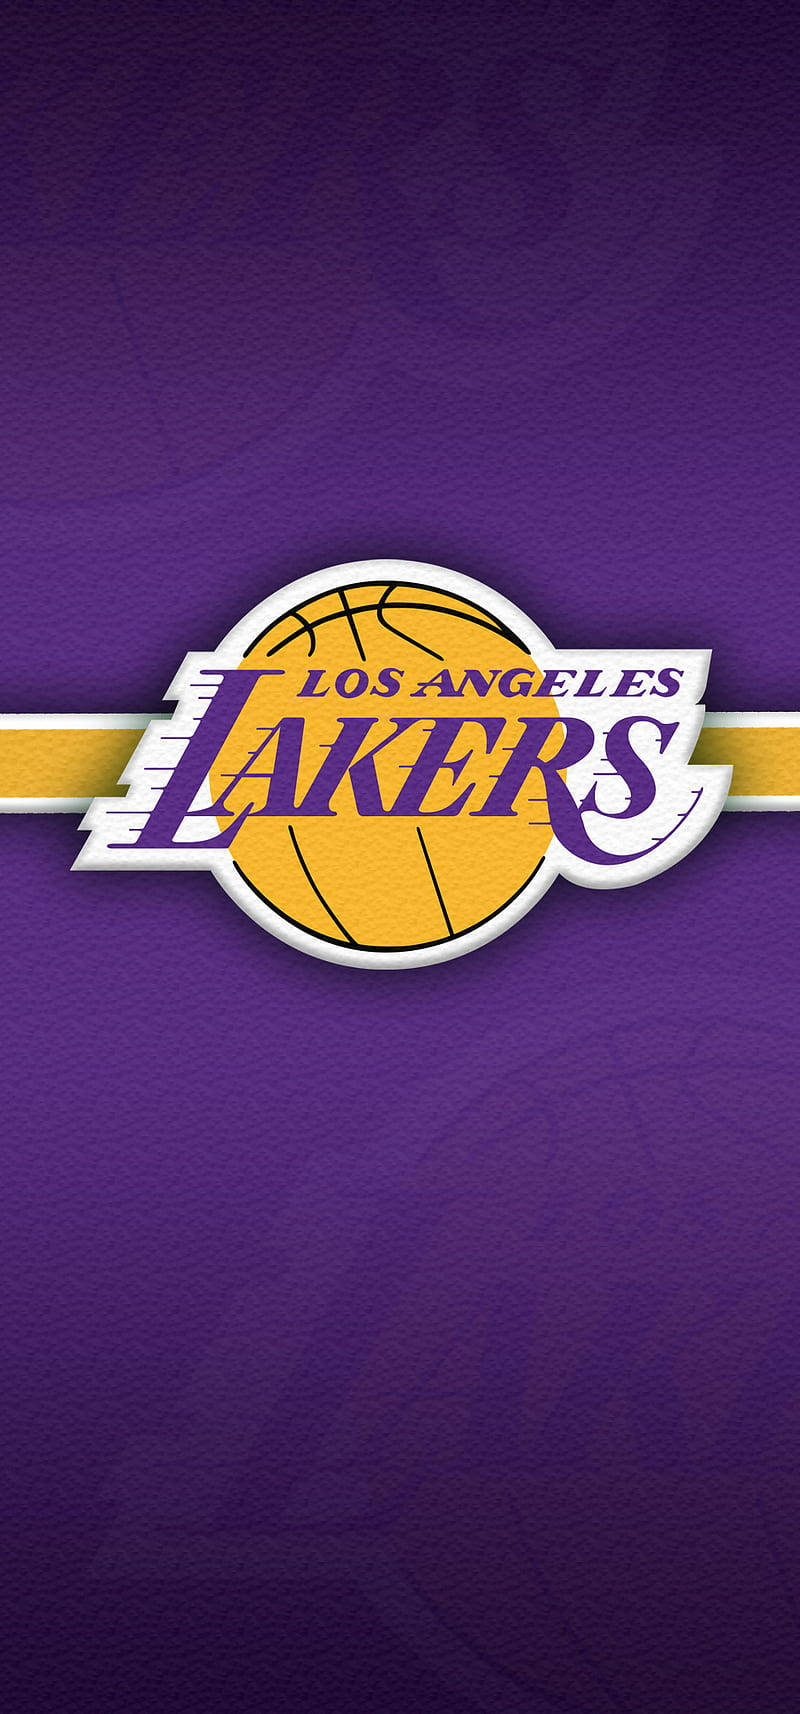 Purple-themed Lakers Iphone Wallpaper